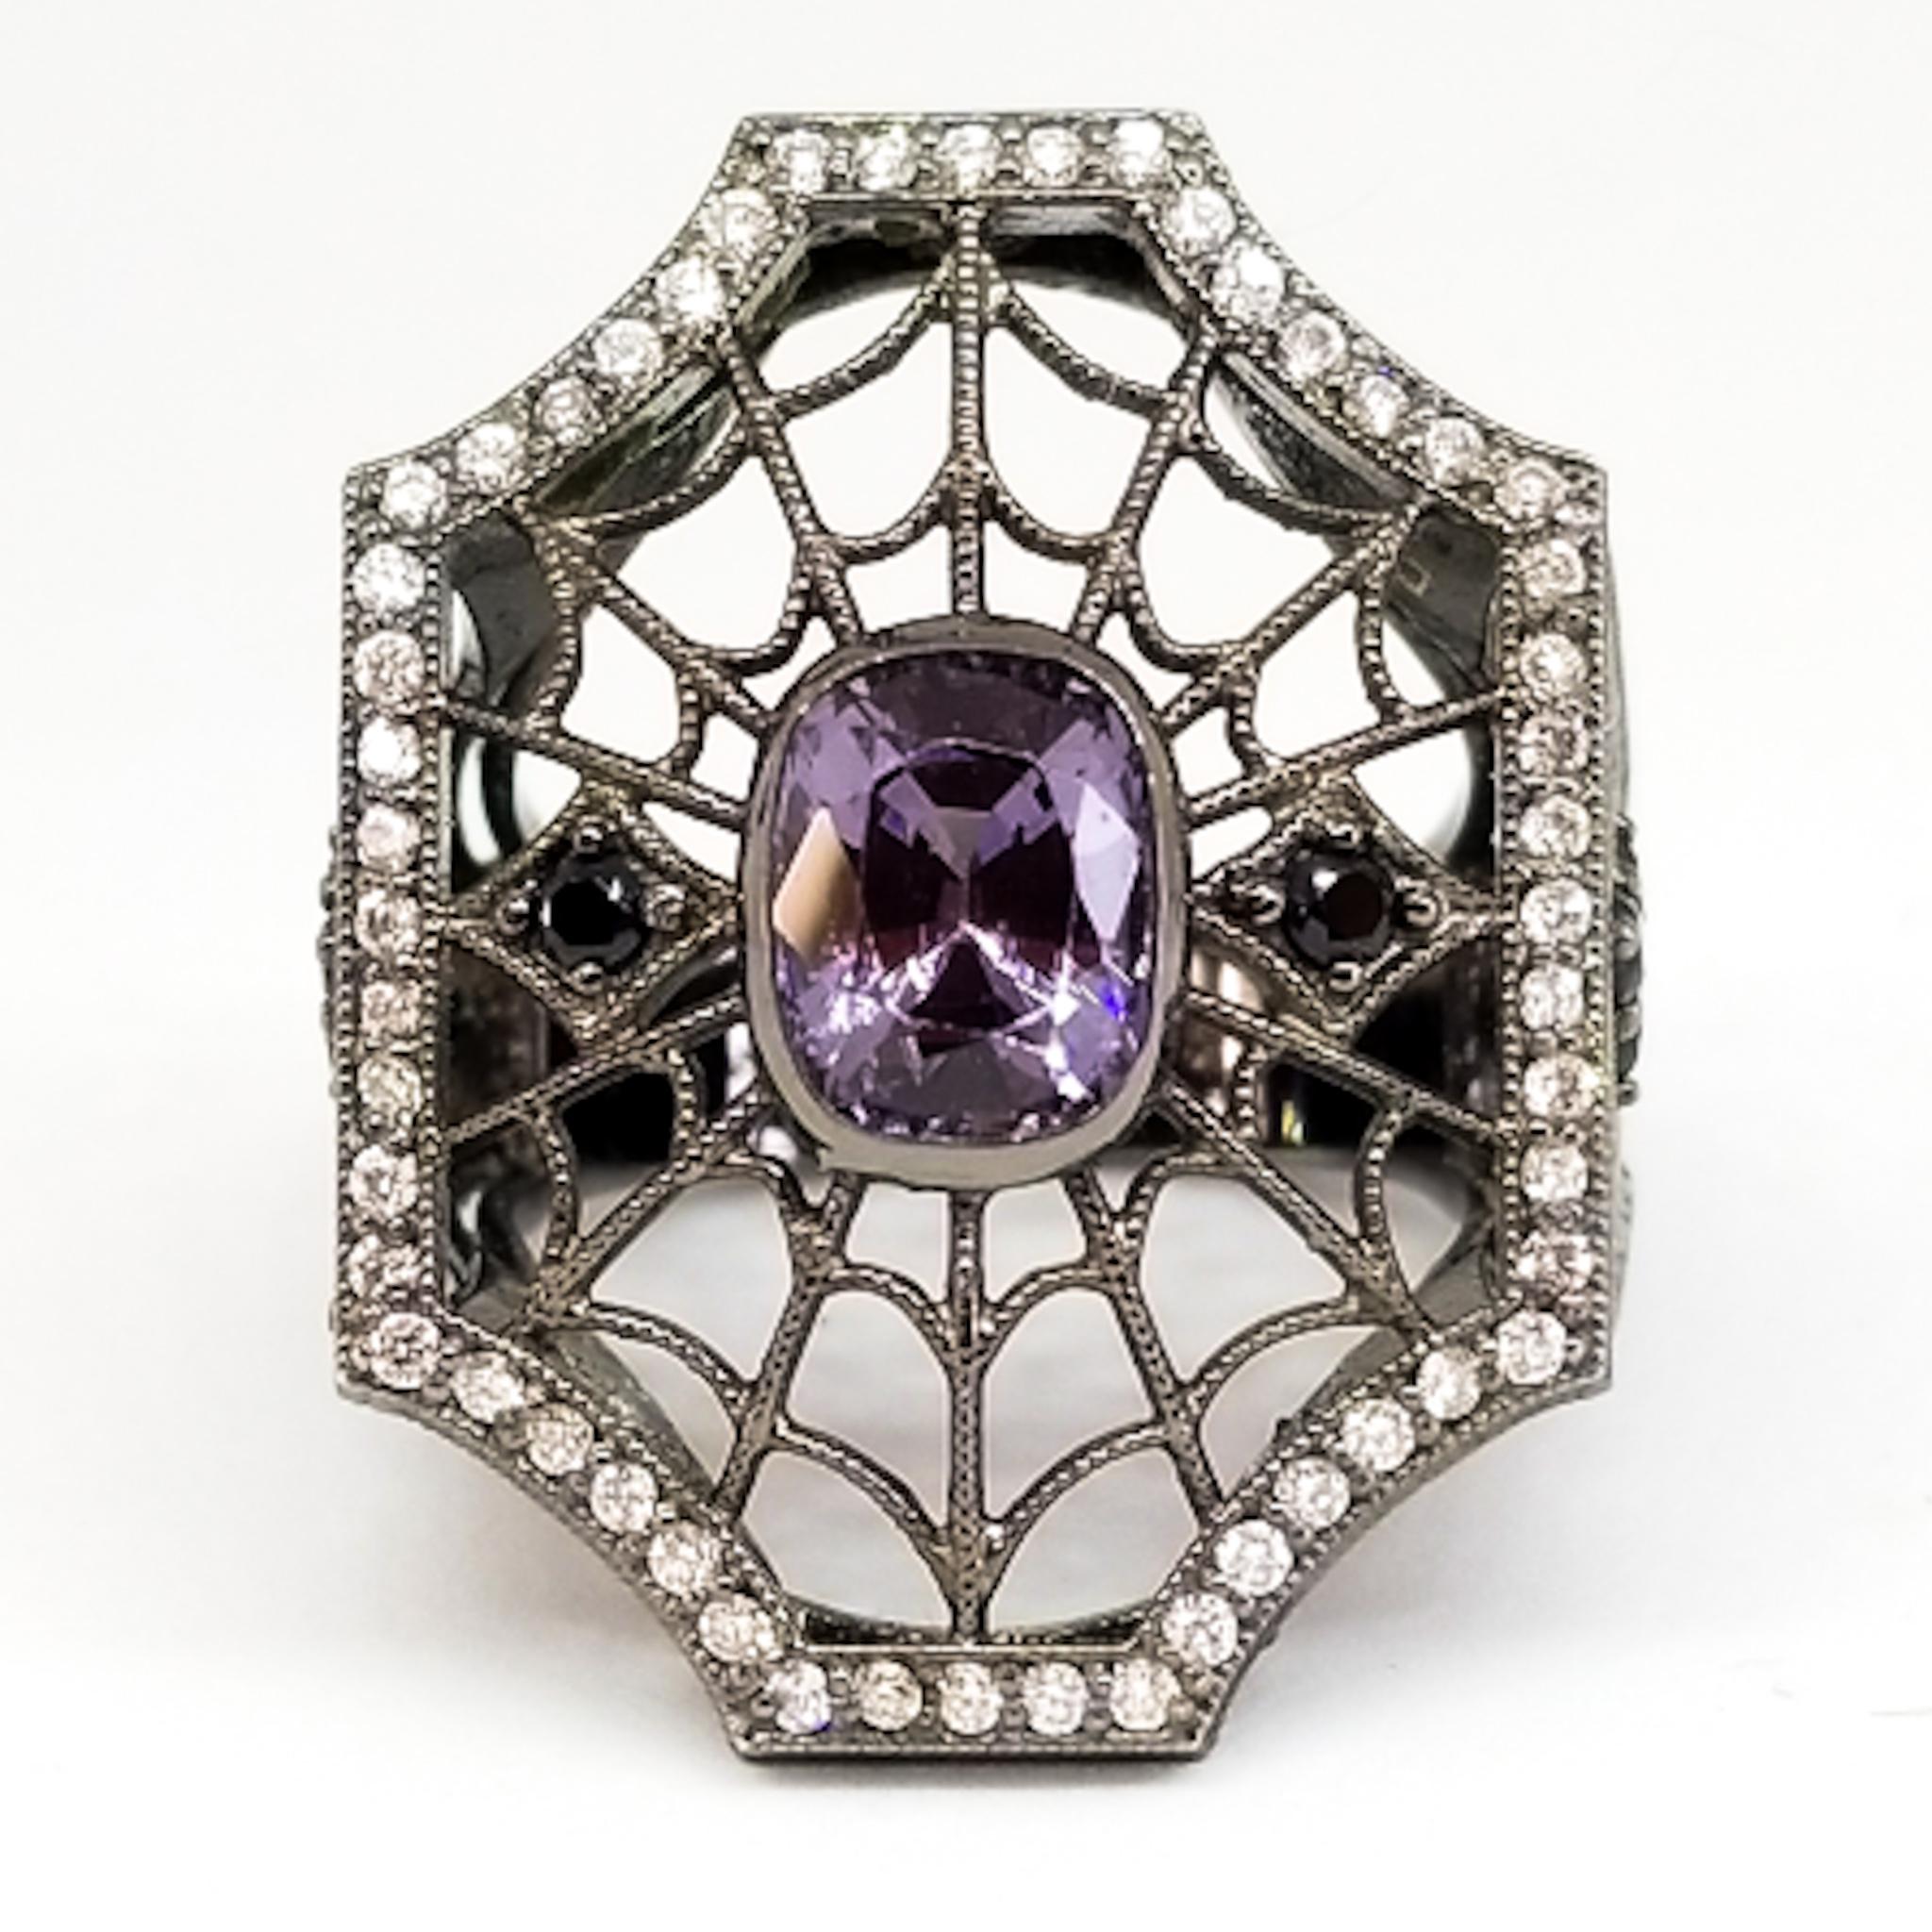 This one of a kind Ring by Tom Castor is a Large but Airy Statement Ring with Detail and Interest at every angle. The unisex ring in the Victorian Gothic, or Steampunk Style features a Spiderweb of openwork filigree and Millegrain Detail. The center